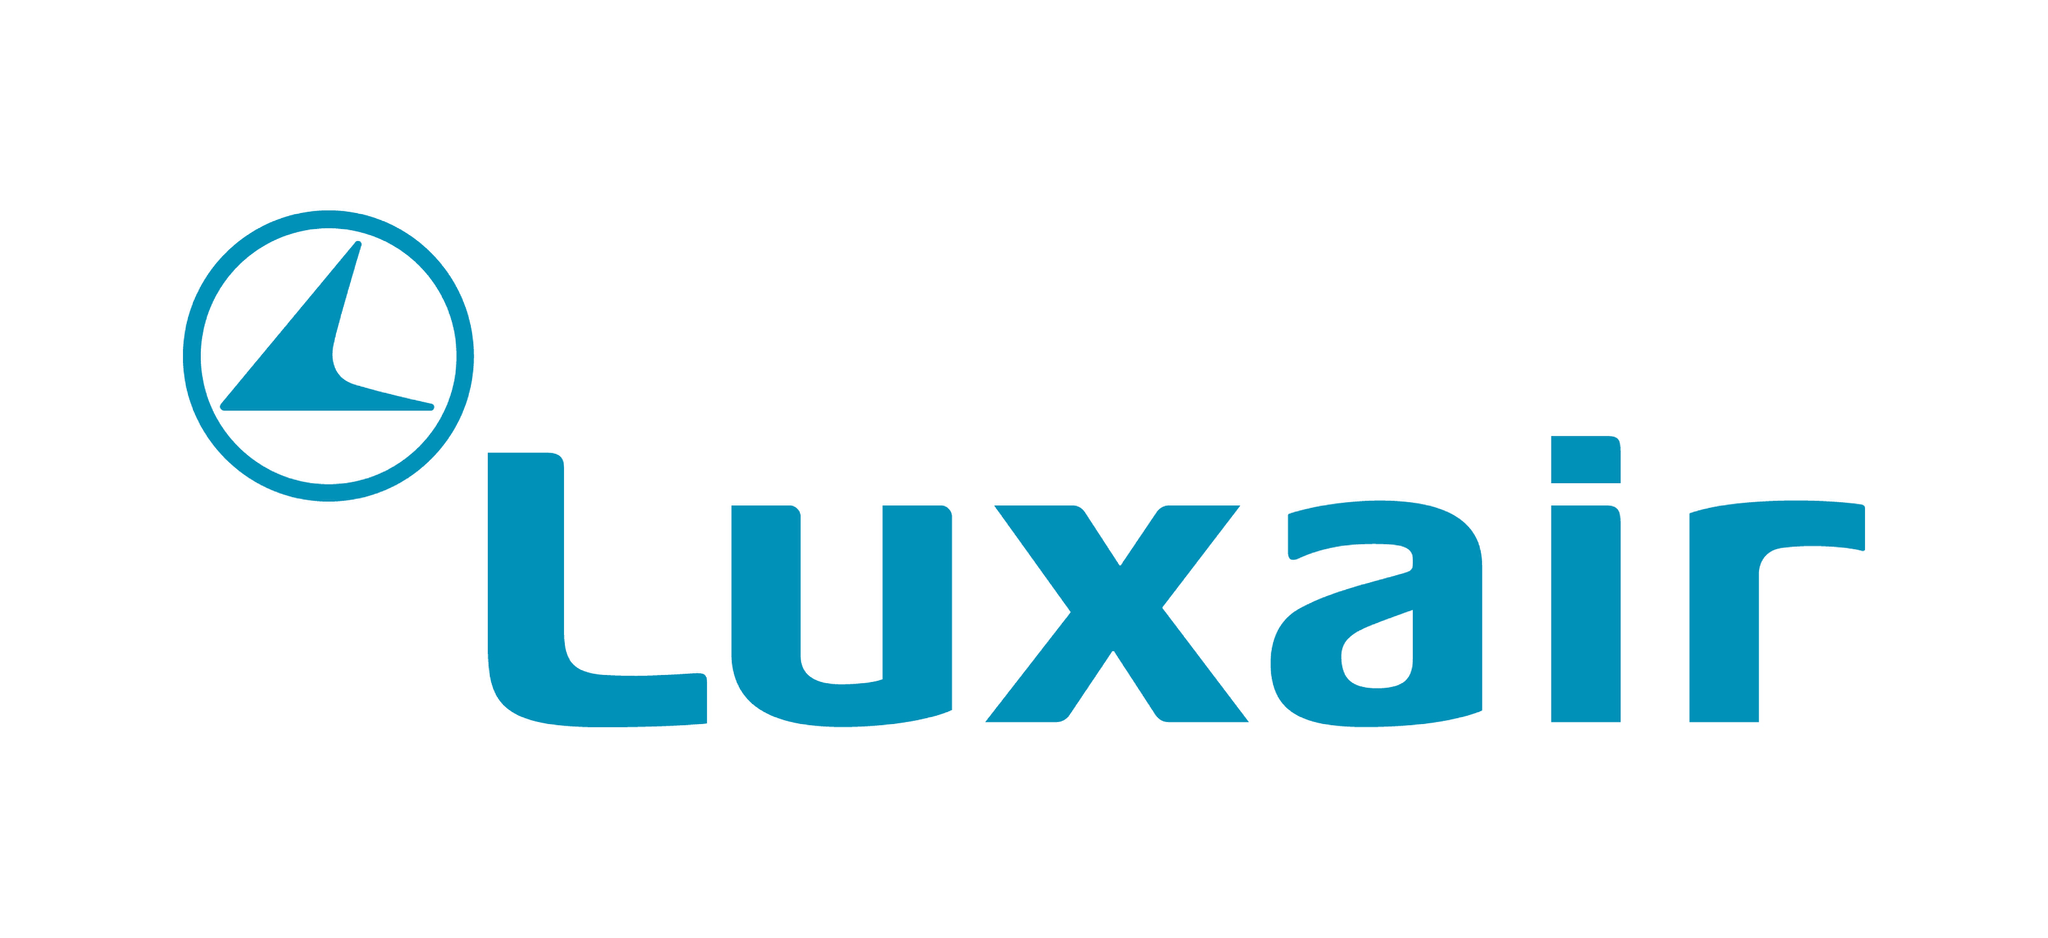 Luxair Luxembourg Airlines